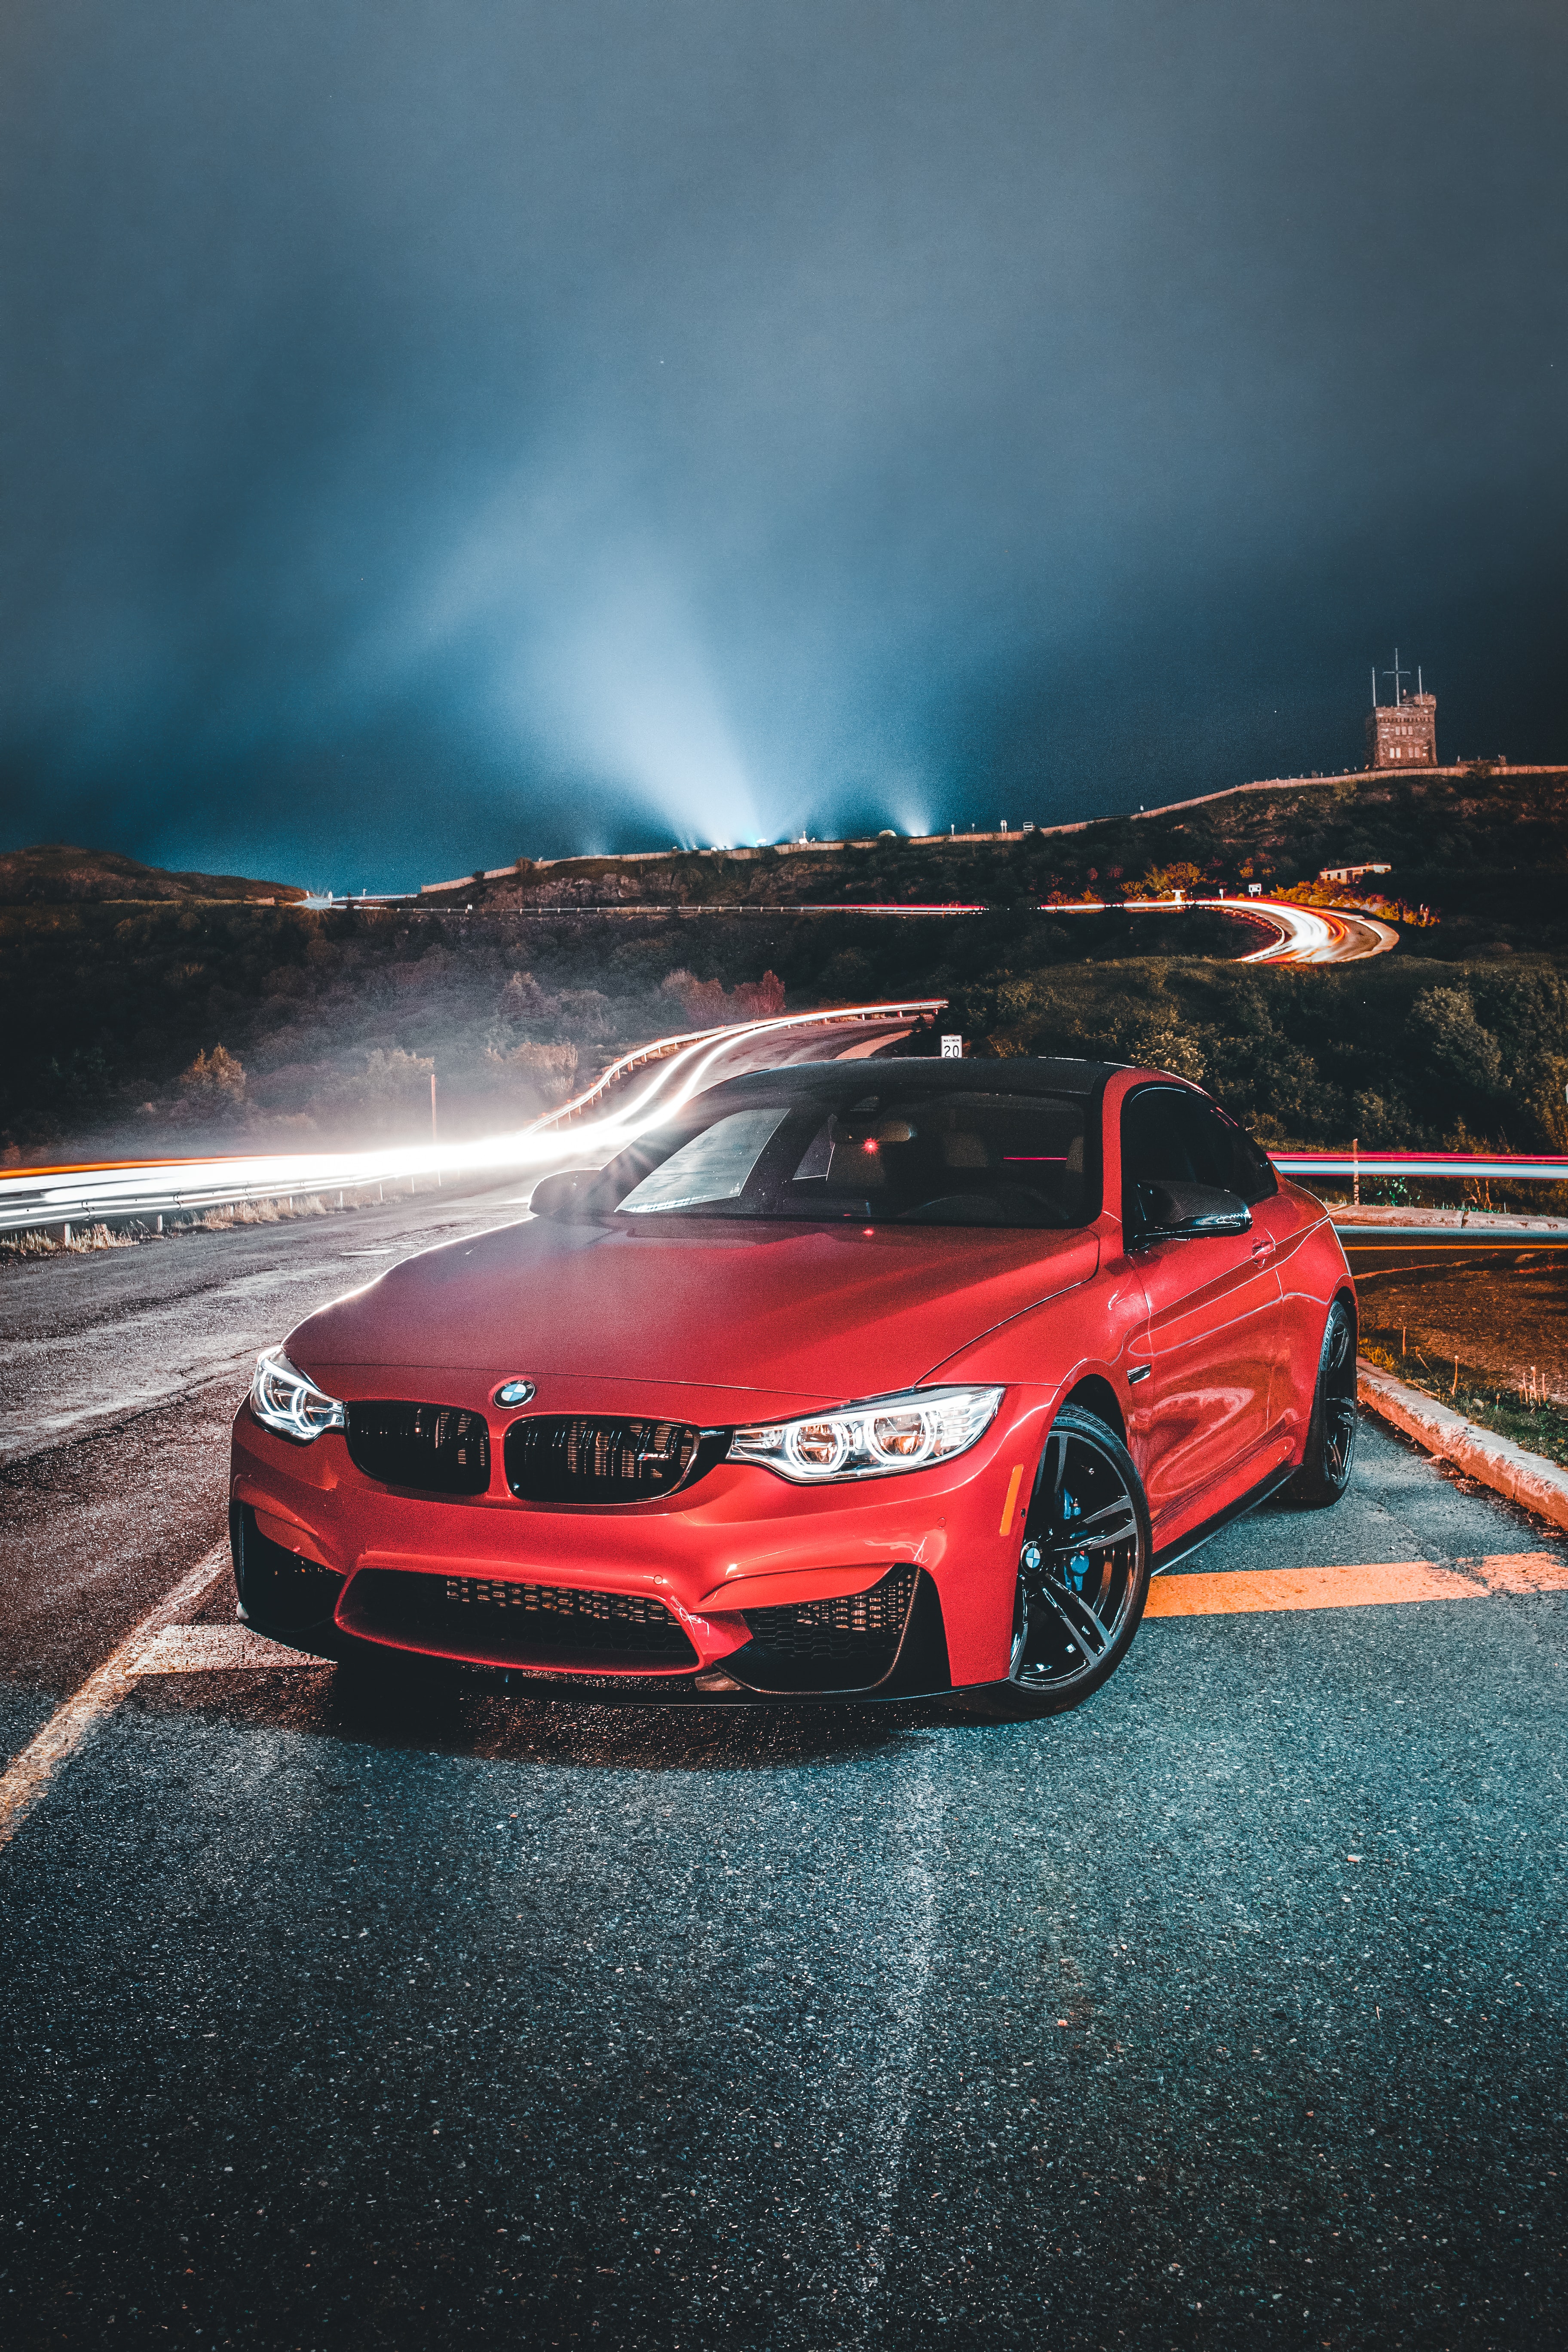 bmw, front view, cars, red, road, car, machine, bmw 320i phone background